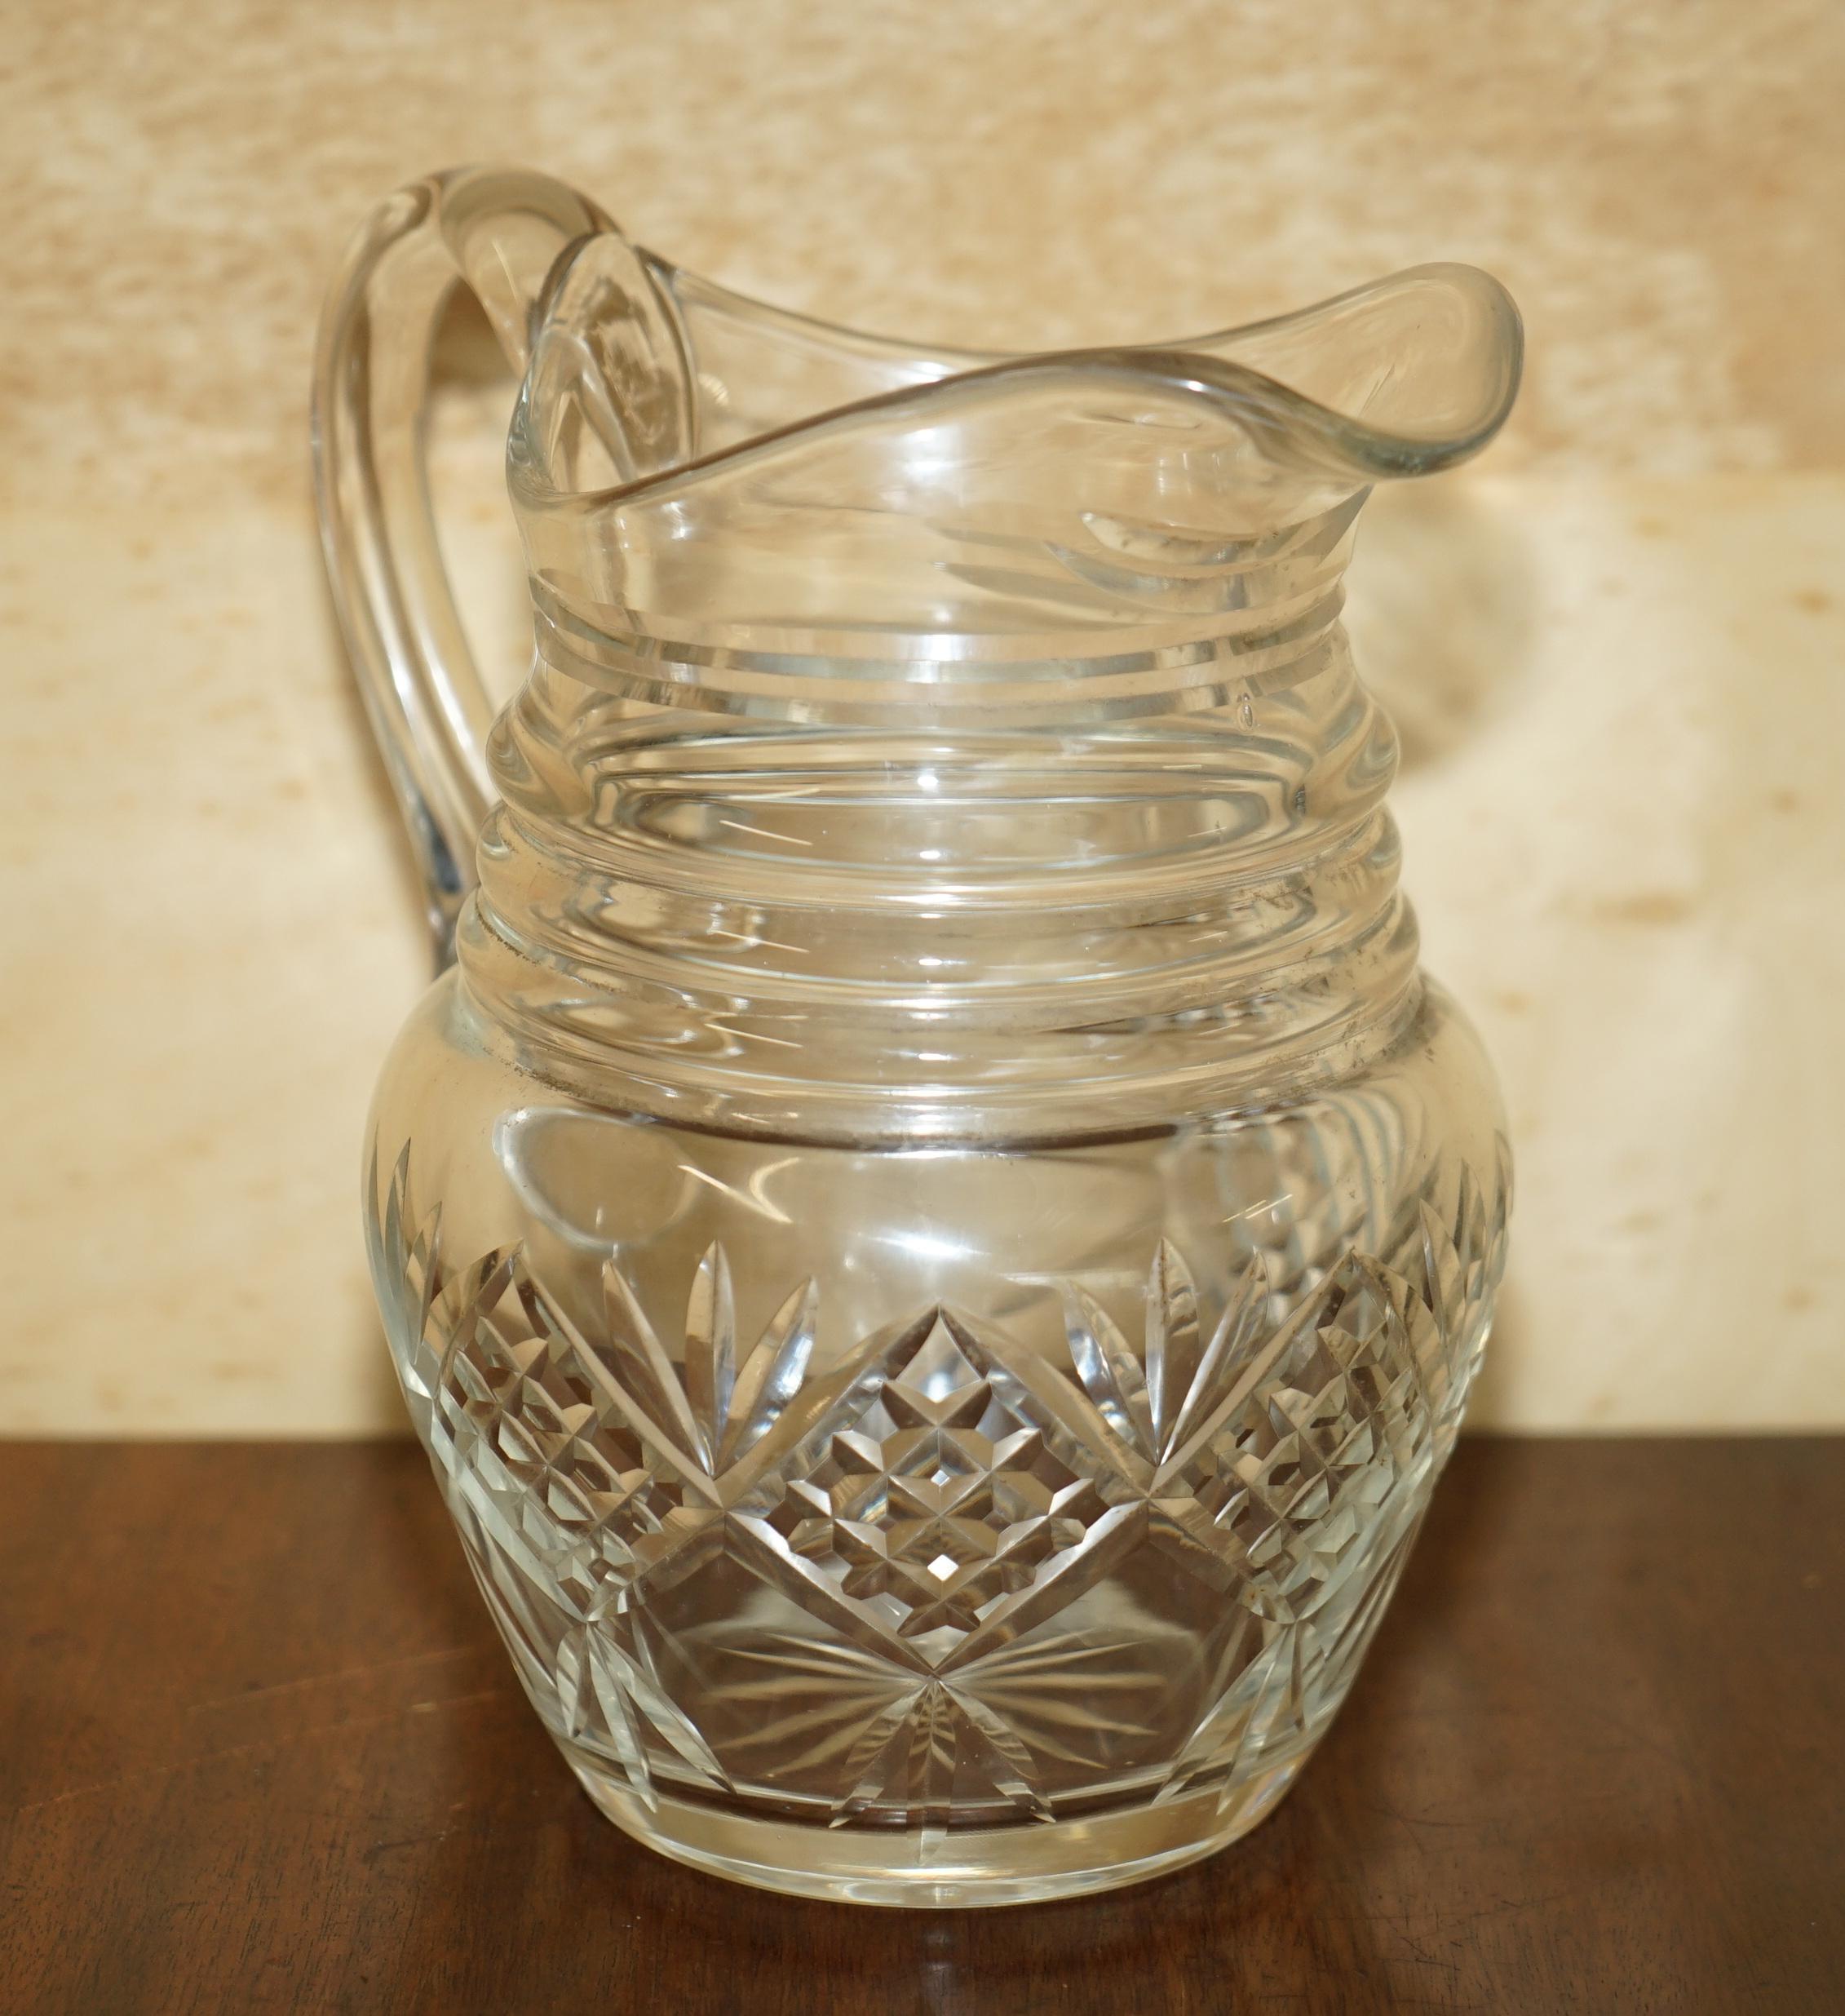 We are delighted to offer for sale this lovely pair of antique circa 1930’s Art Deco cut glass jugs for cocktail bars

A very decorative and well made pairing, they are very heavy for the size

The condition is perfect for the age so far as I